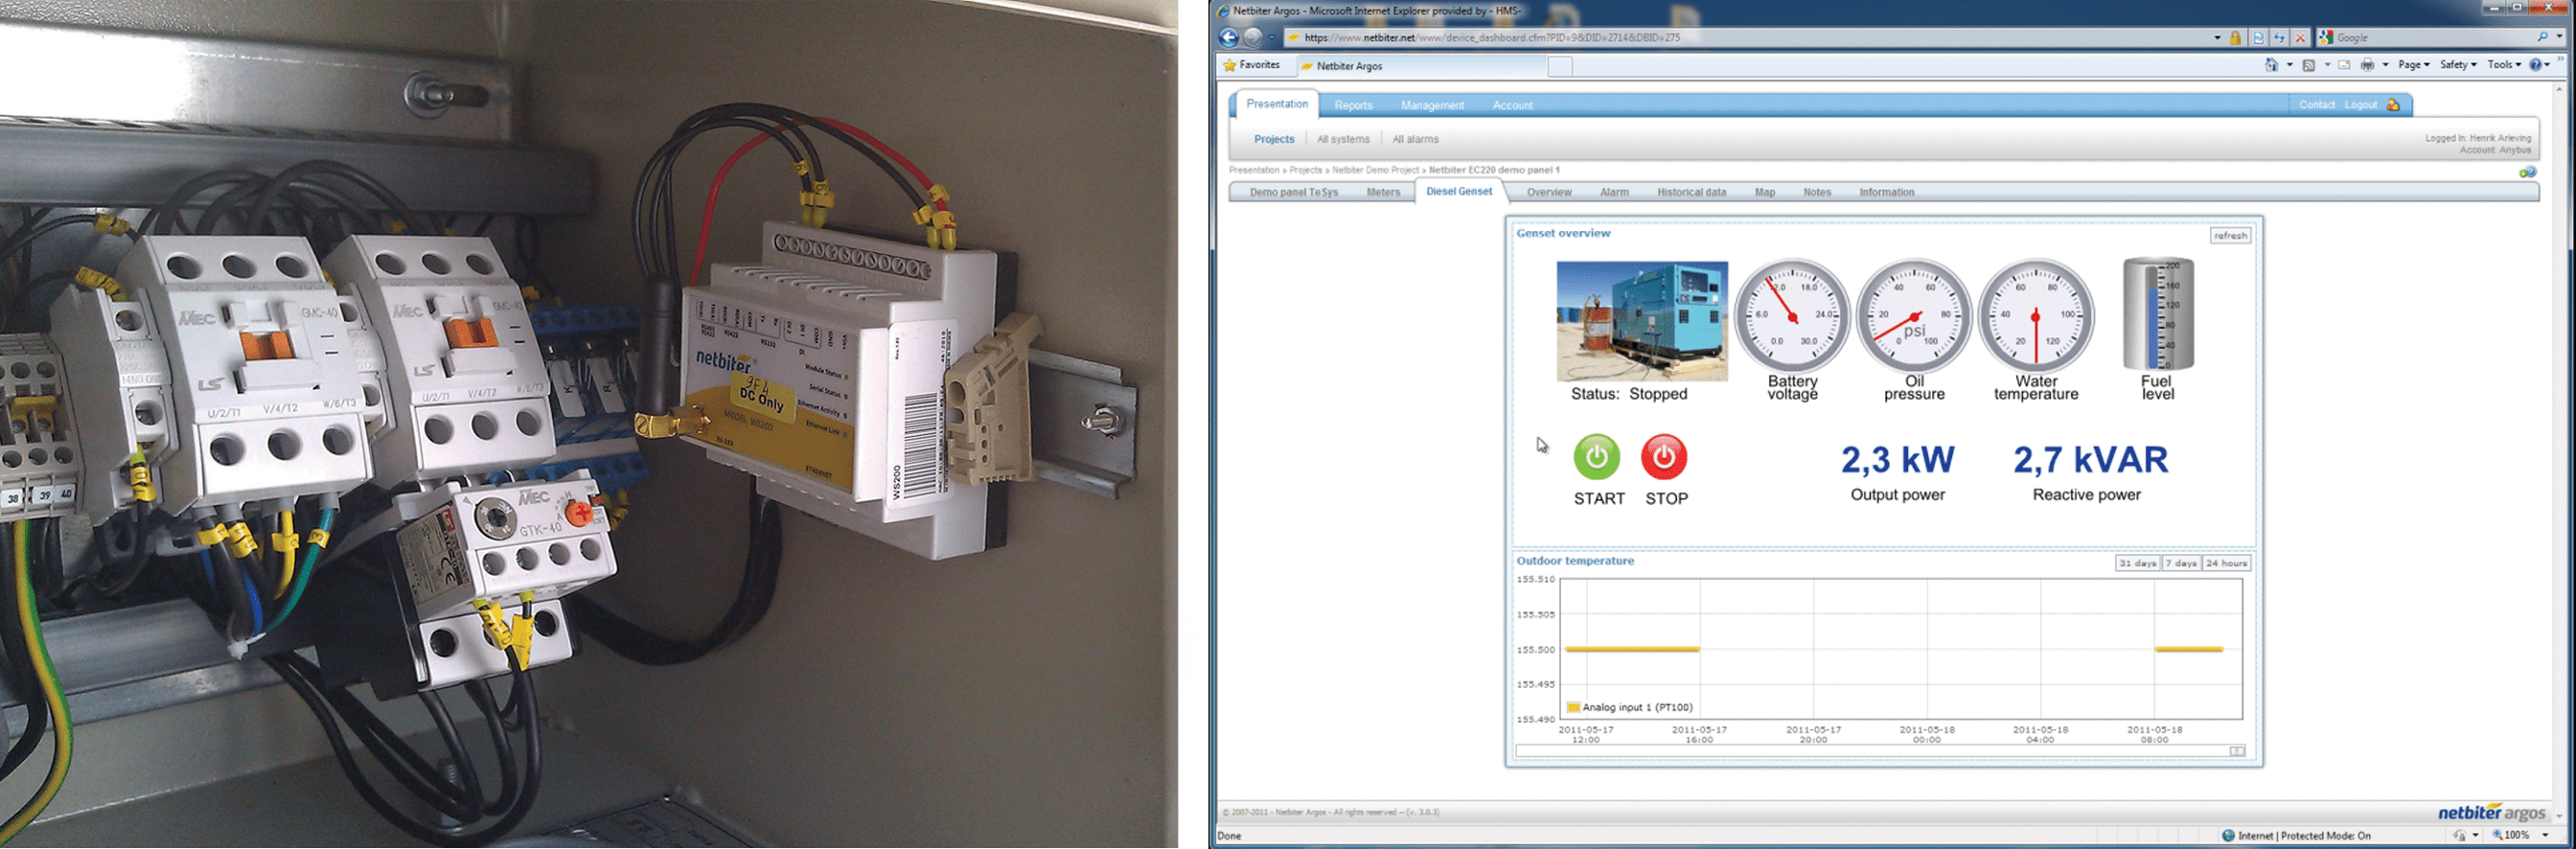 Netbiter connected to the control panel using the internal Modbus network.